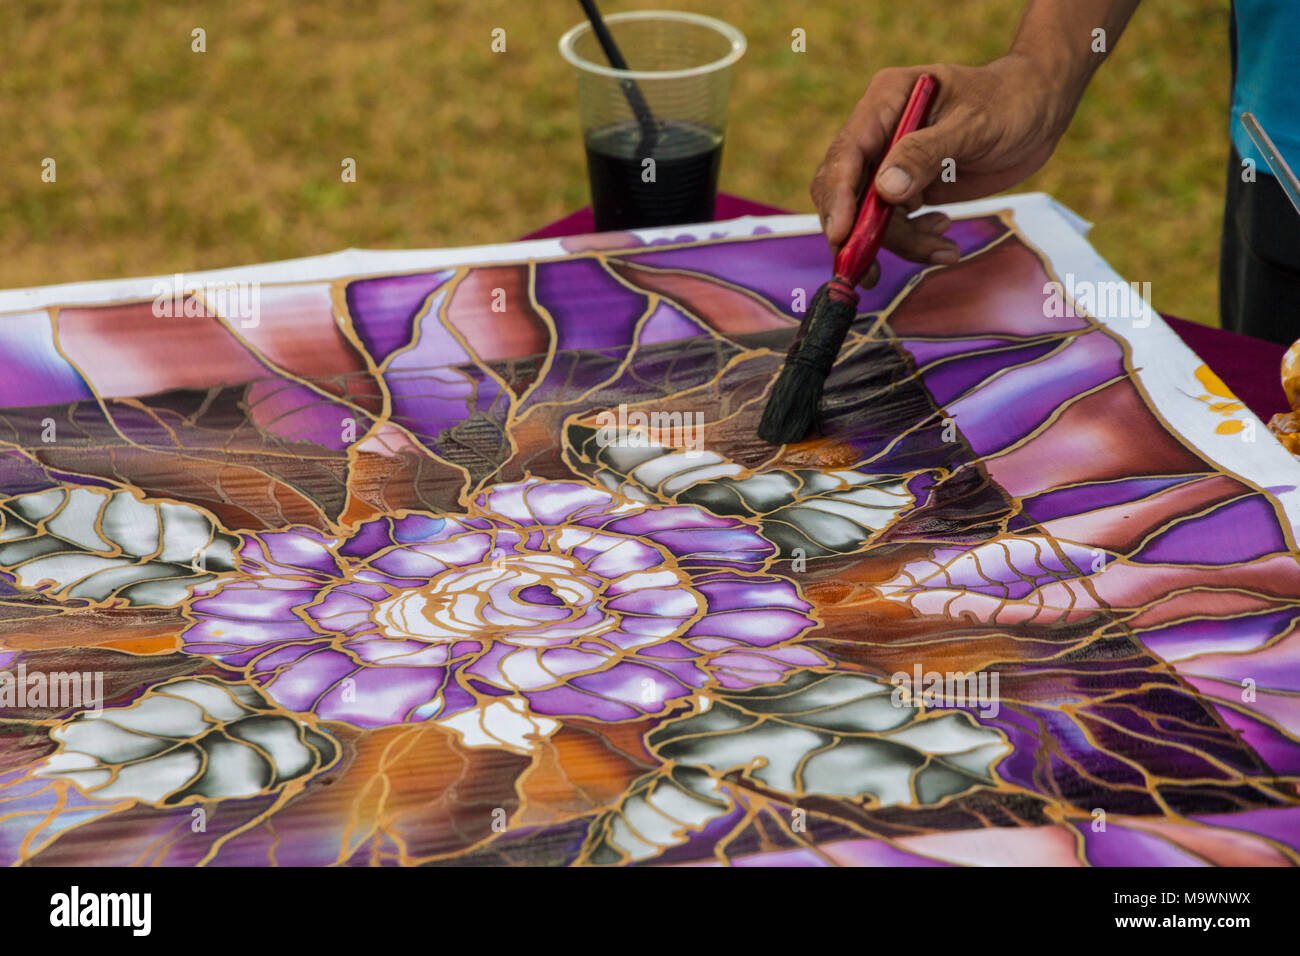 Close-up of a Malaysian batik craftsman showing how to brush paint colours on to a fabric with the popular motif of leaves and flowers. Stock Photo